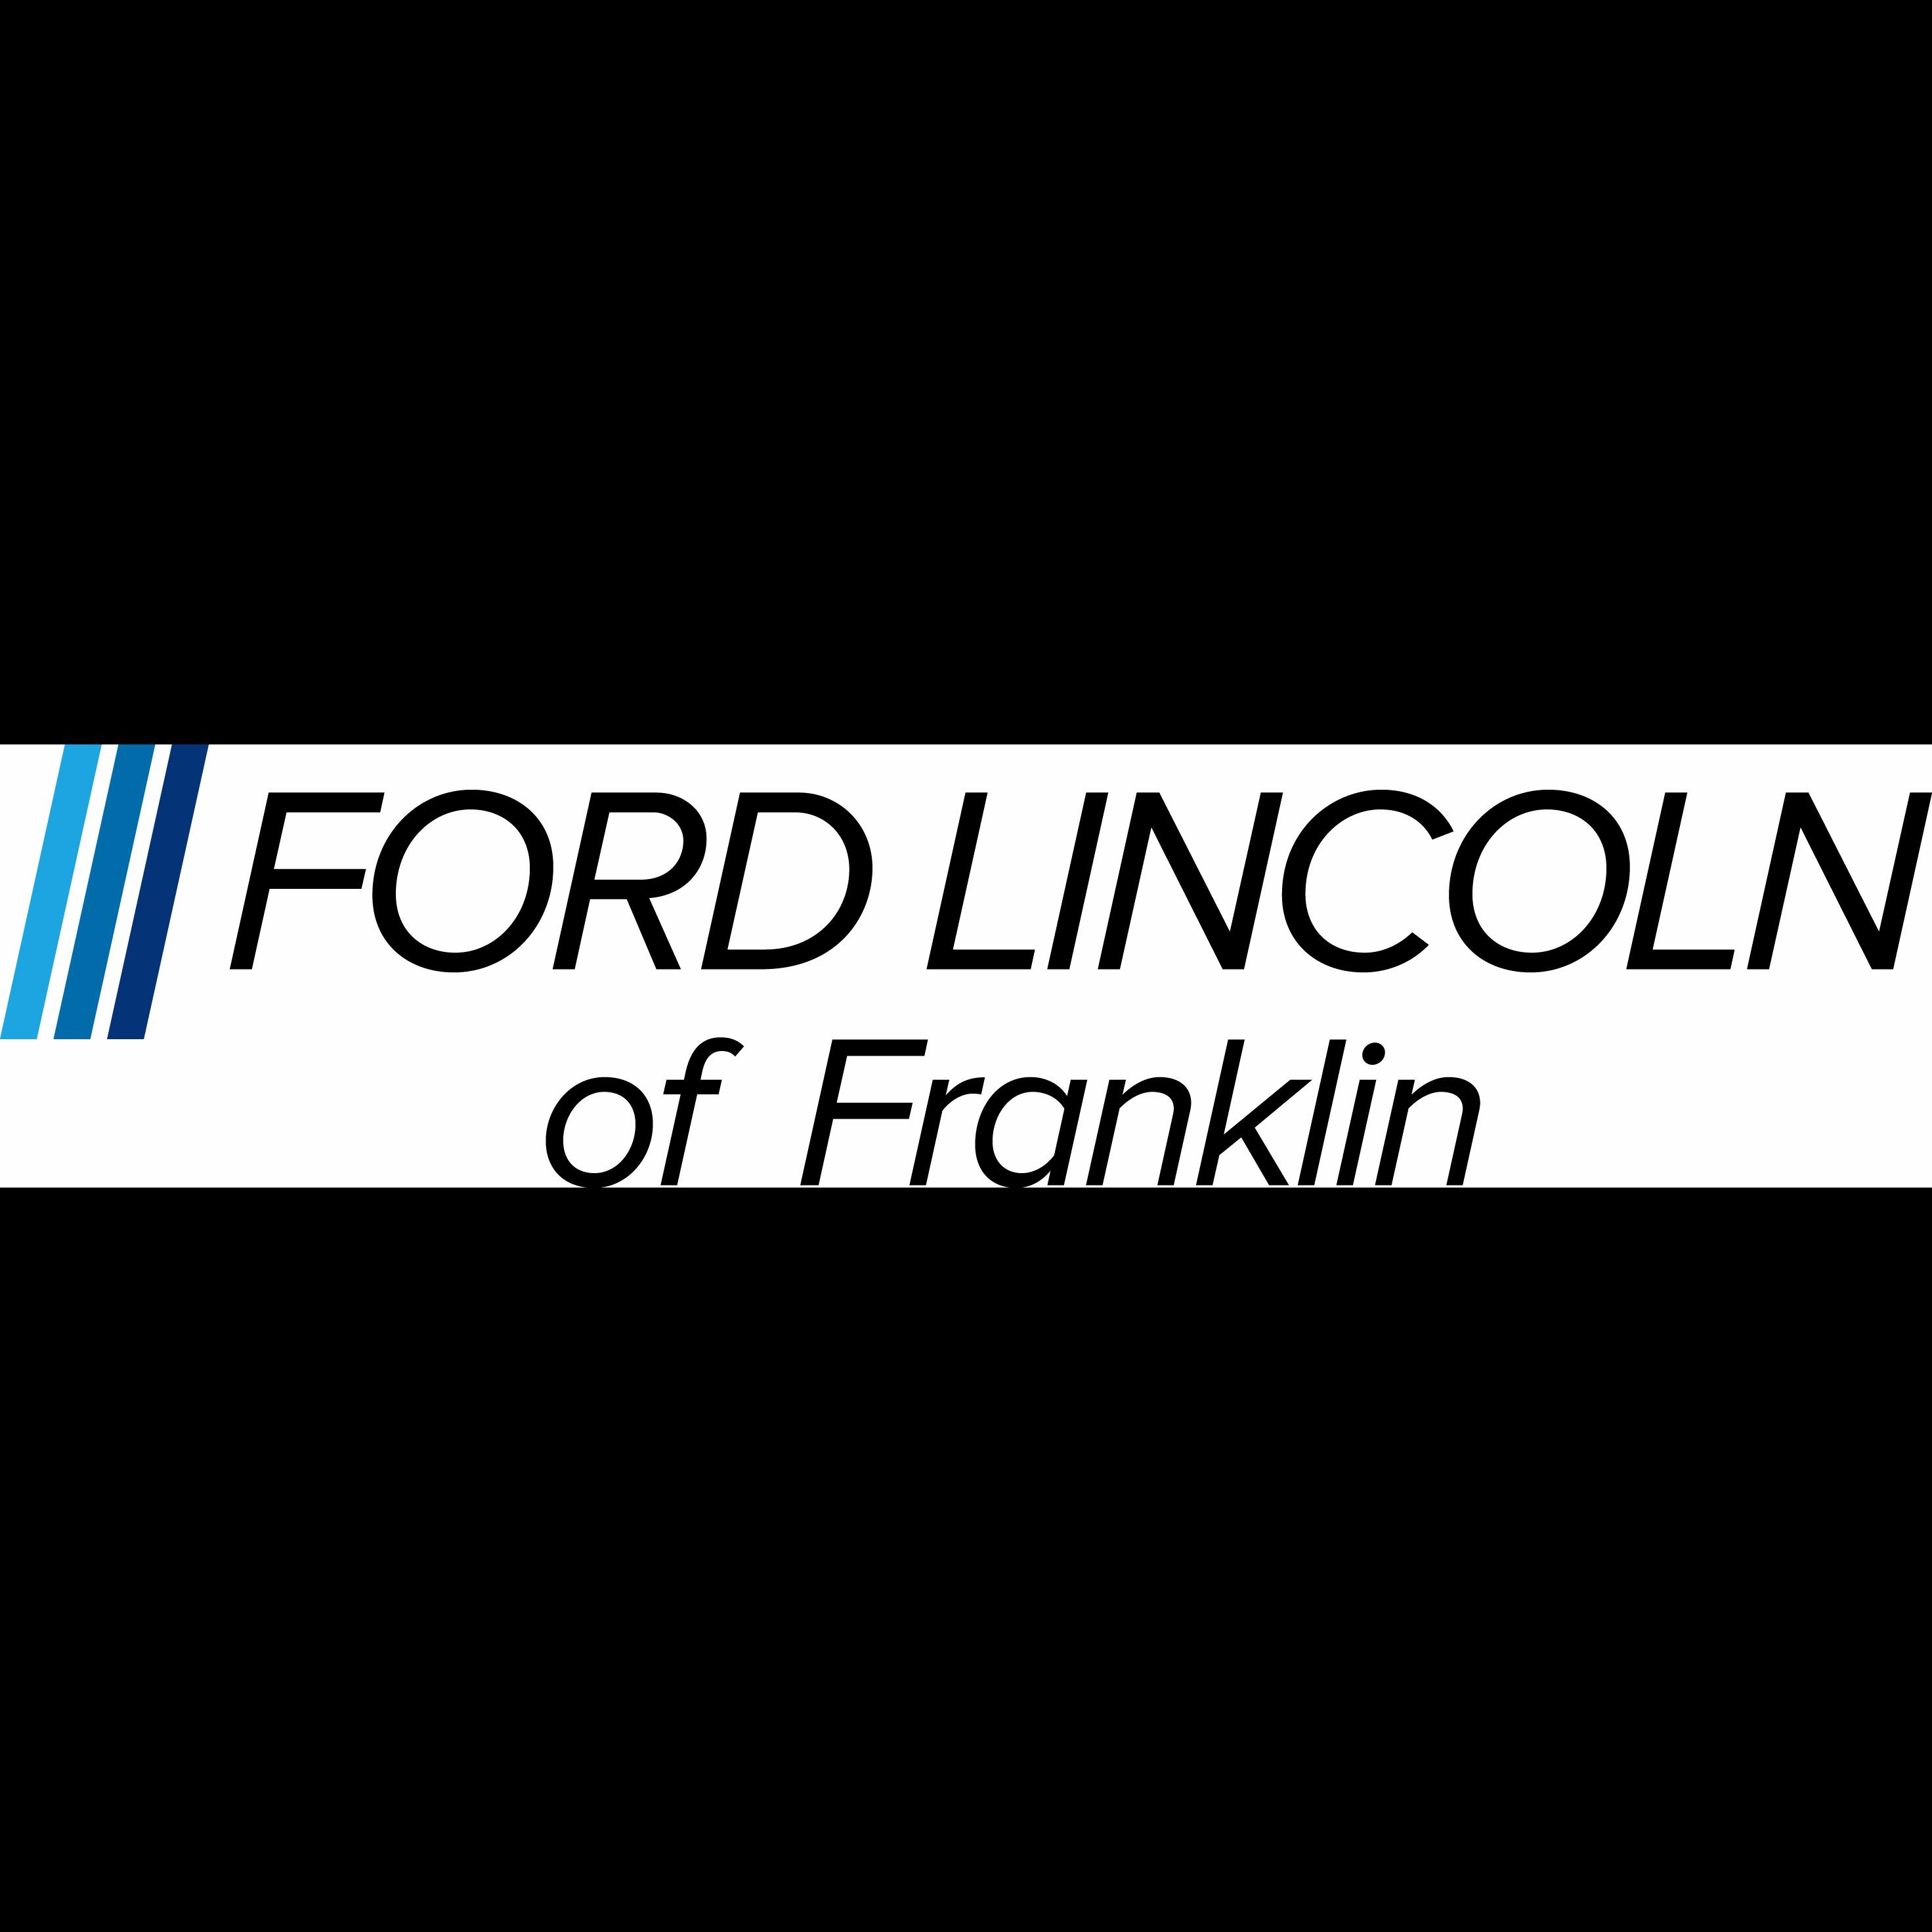 Ford Lincoln of Franklin Logo